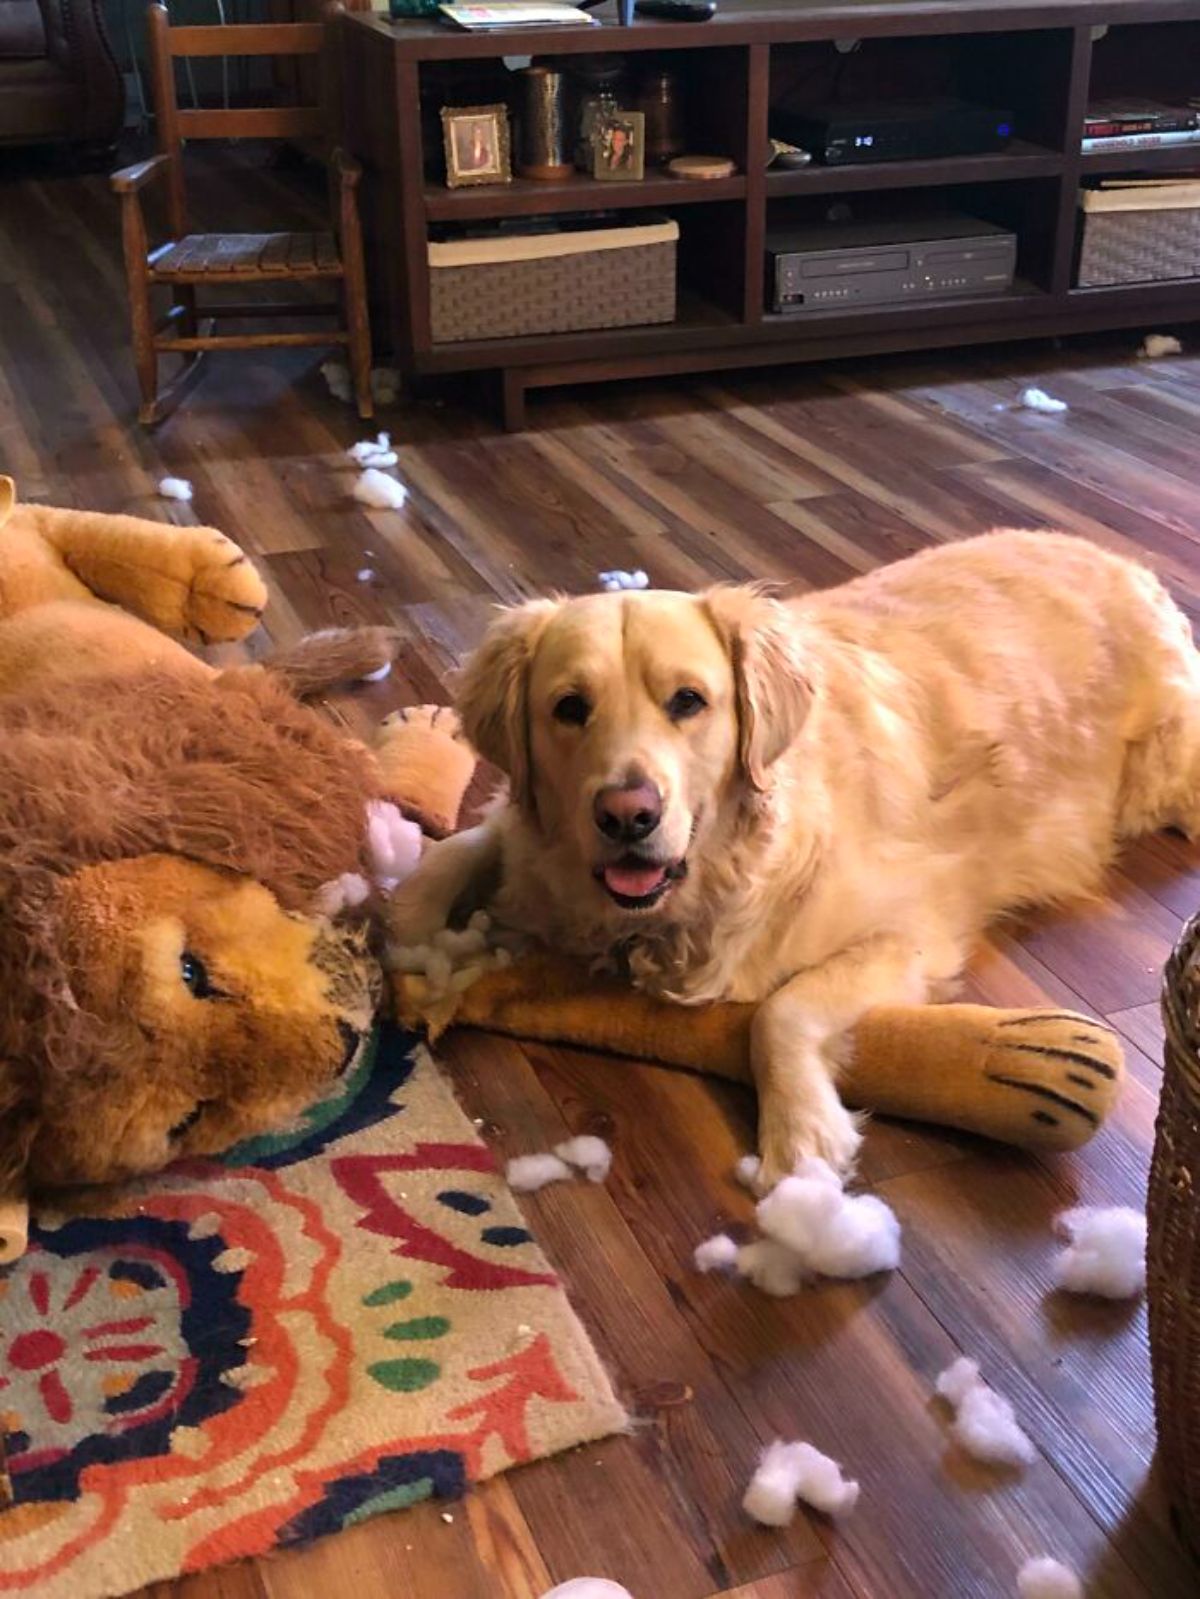 golden retriever laying on the floor next to a large brown lion stuffed toy that's been ripped up with stuffing on the floor